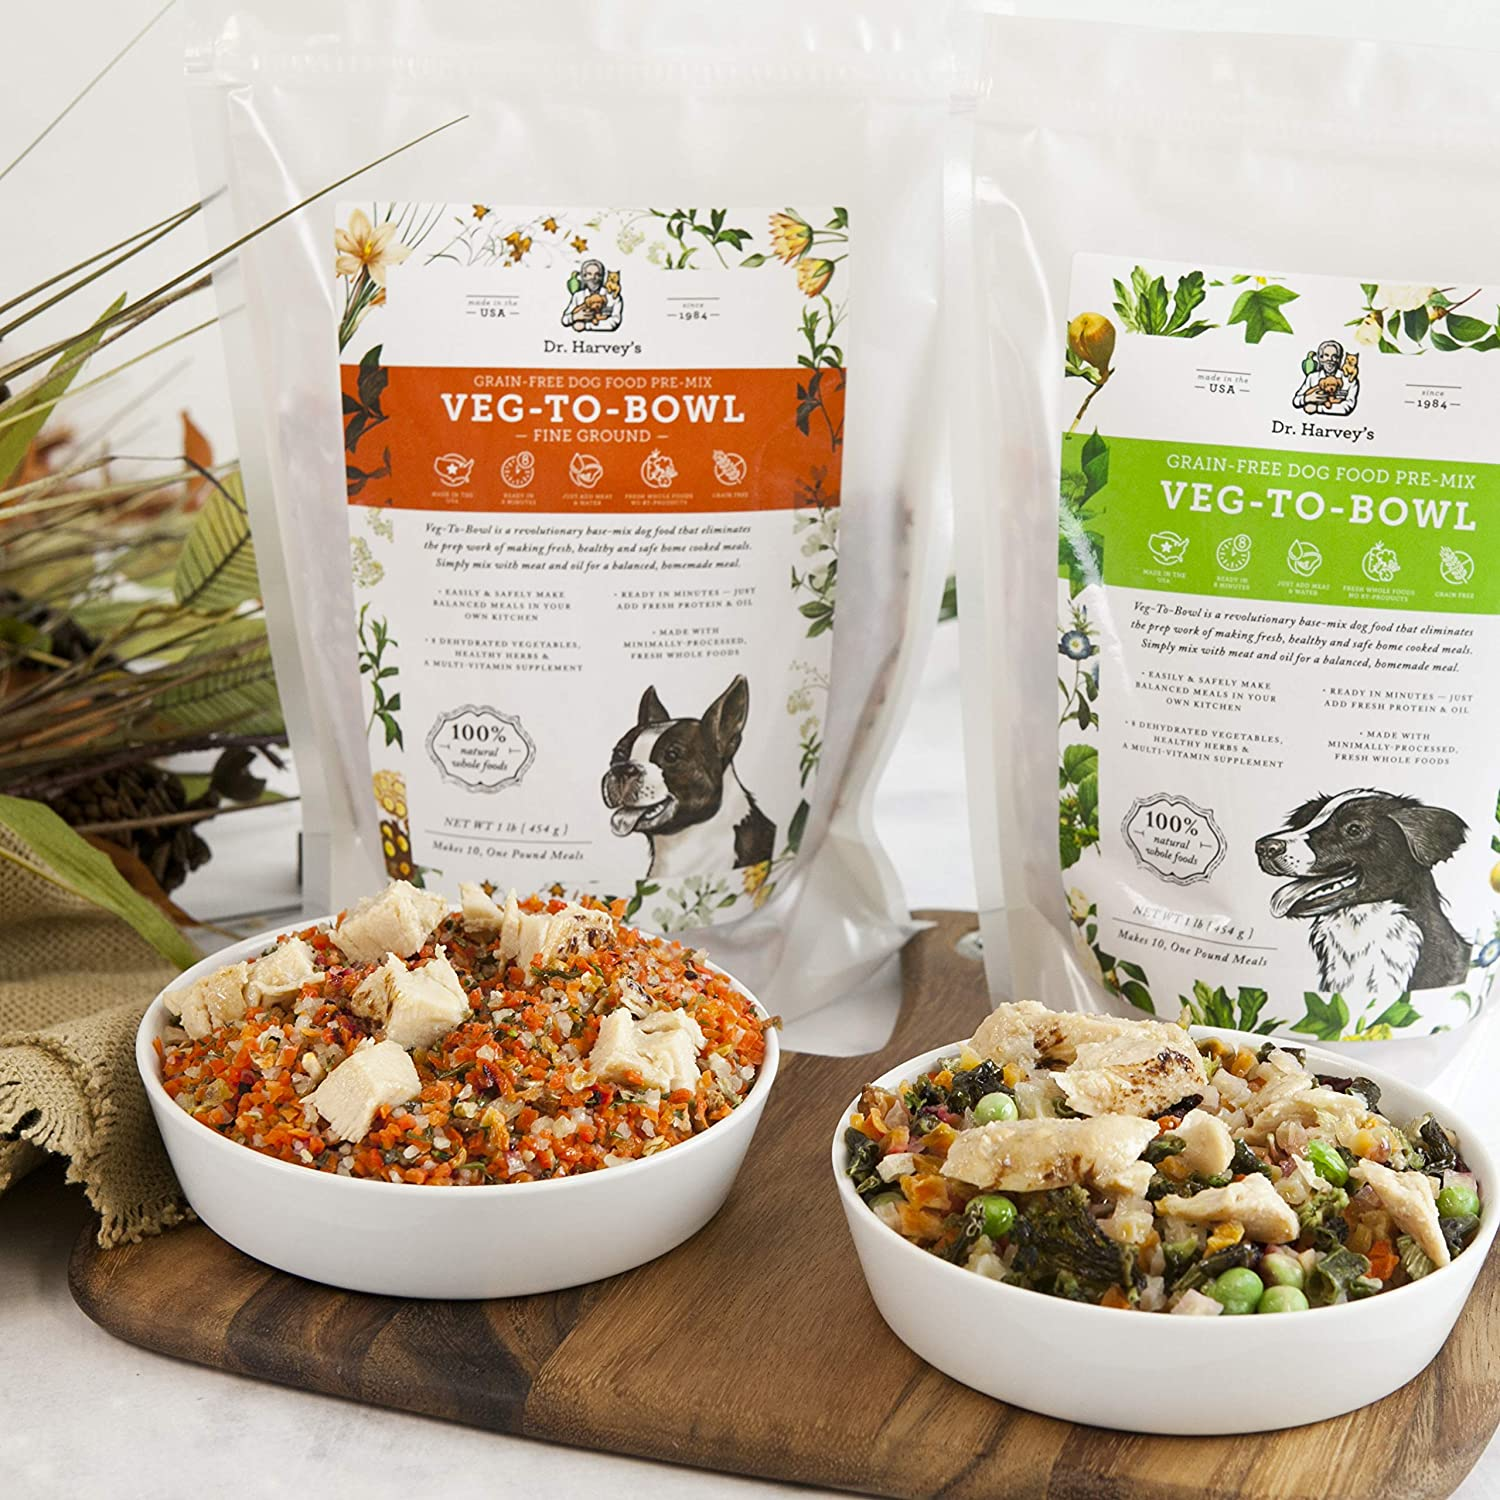 Veg-To-Bowl Dog Food, Human Grade Dehydrated Base Mix for Dogs, Grain Free Holistic Mix